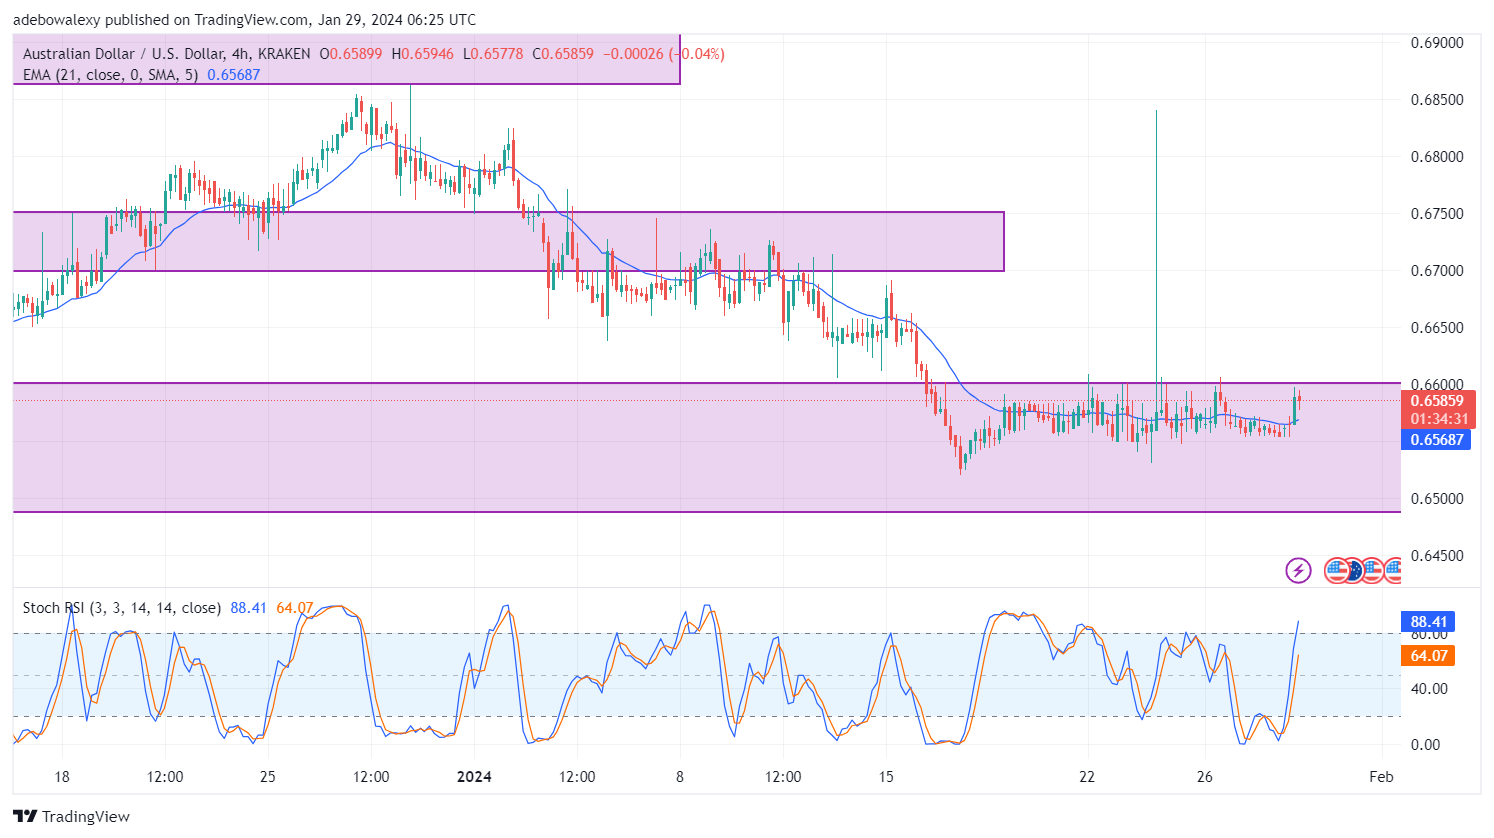 AUDUSD Eyes Breaking Out of the 0.6600 Resistance